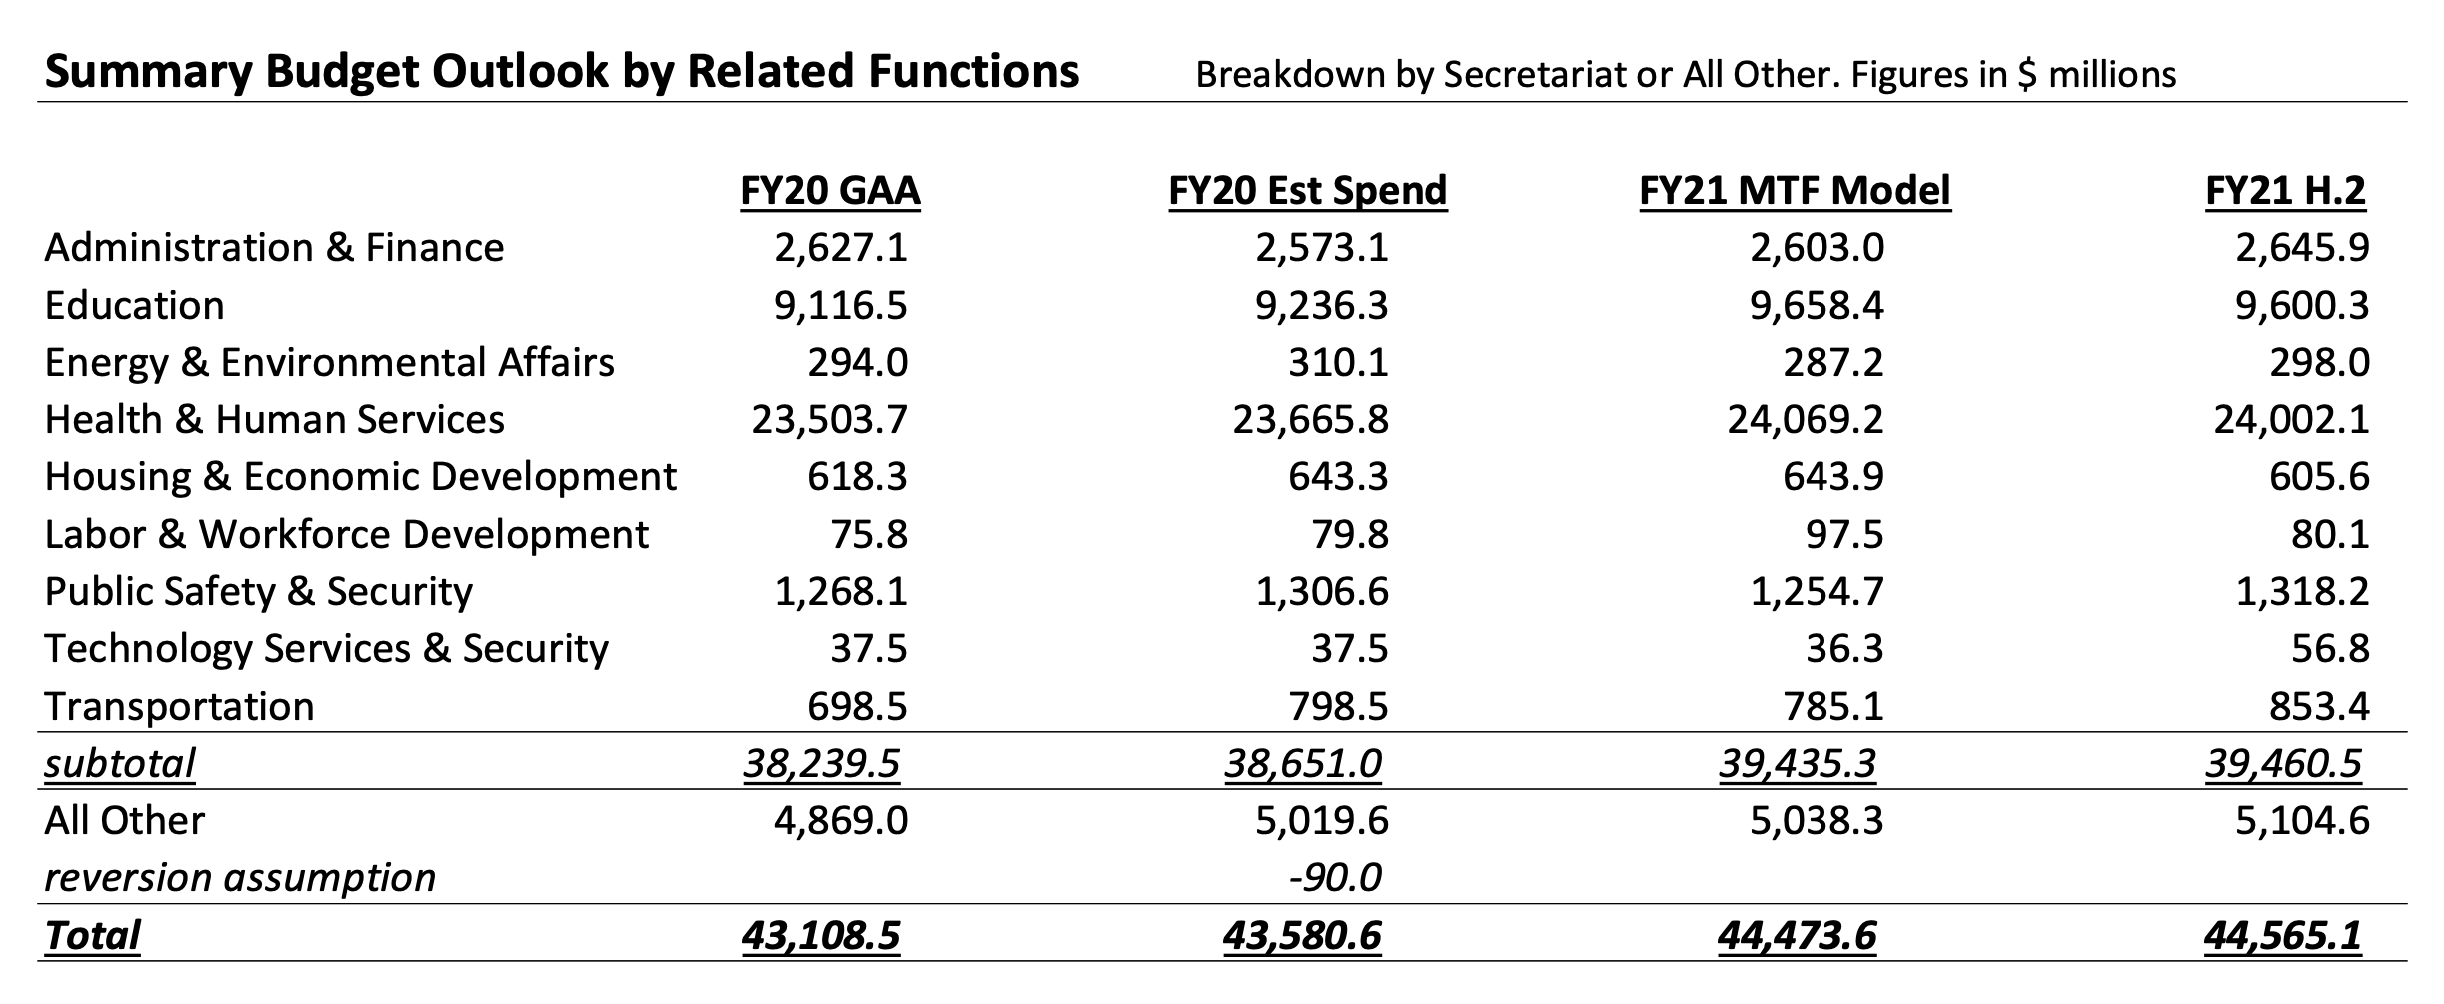 Summary Budget Outlook by Related Functions